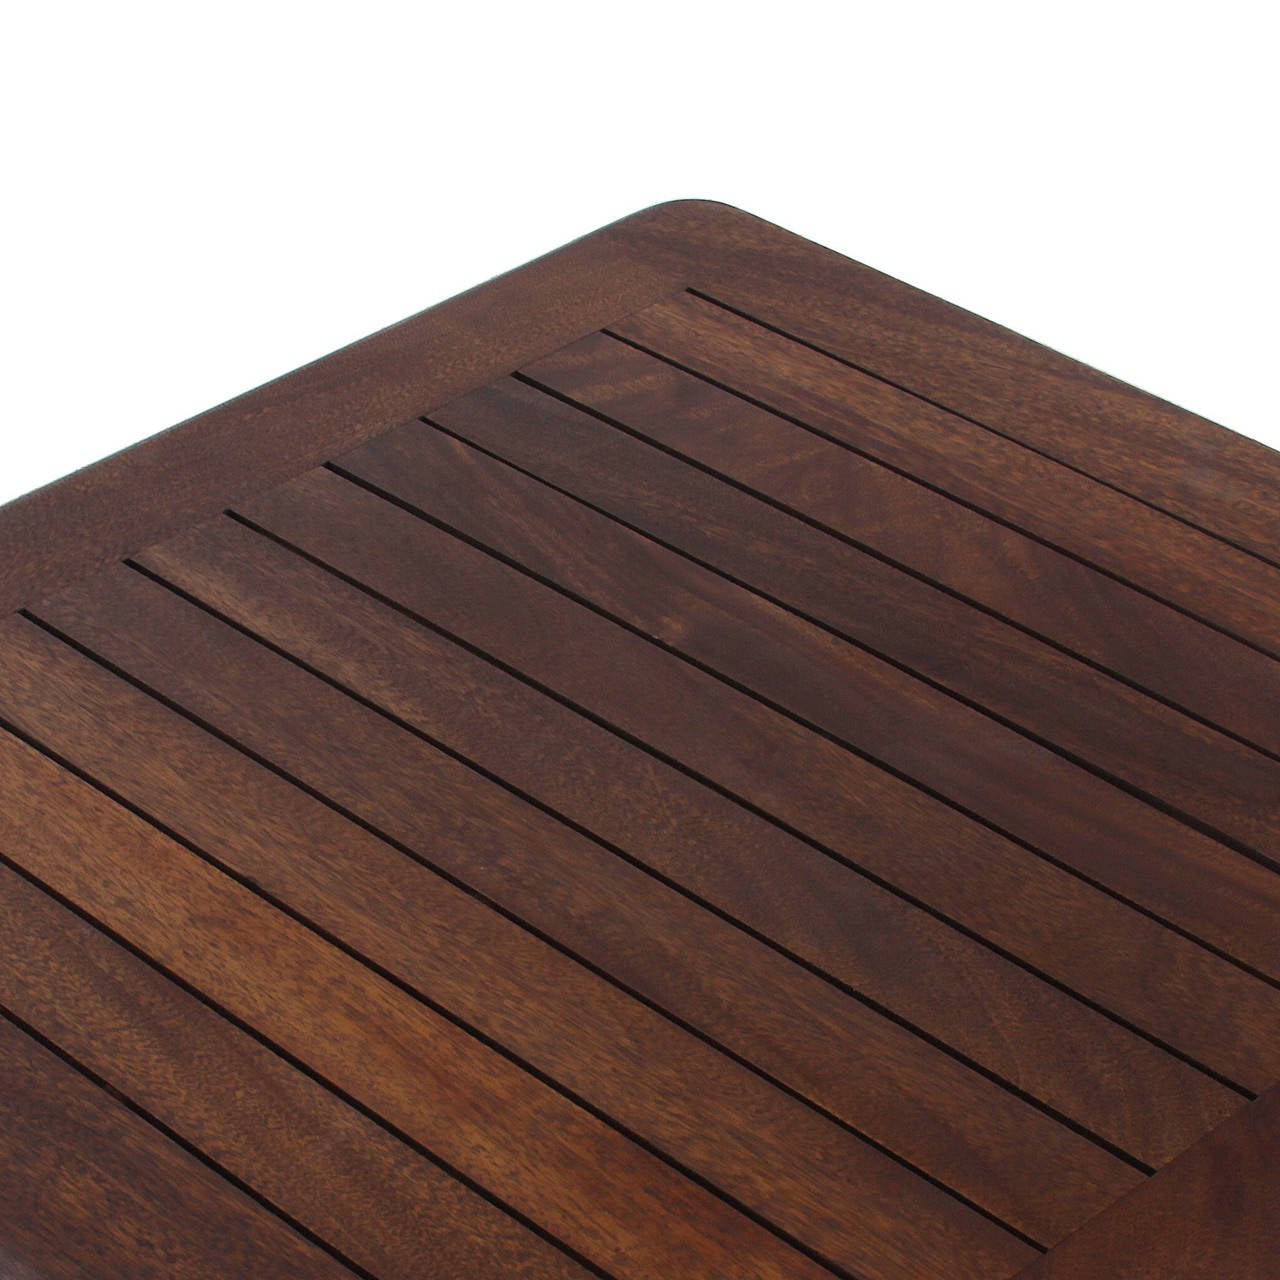 Slatted Solid Honduran Mahogany coffee table by Sherrill Broudy For Sale 1